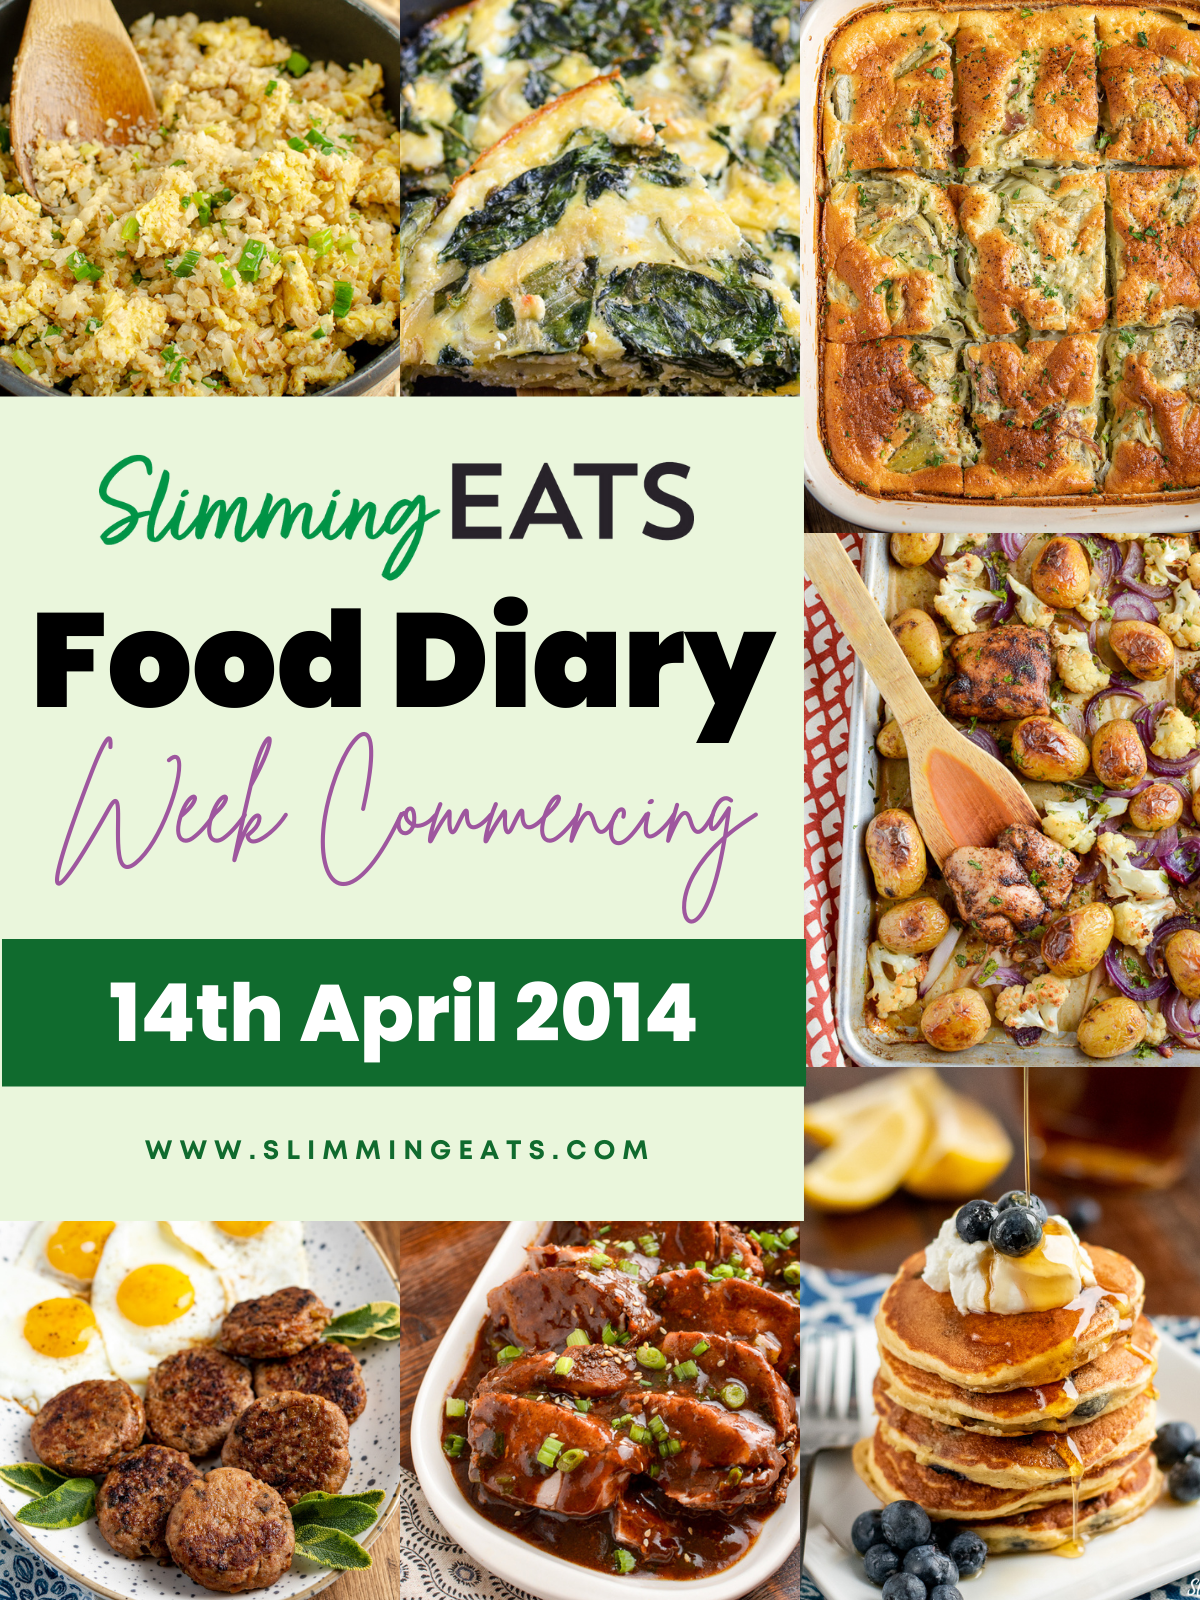 Slimming Eats Food Diary week commencing 14th April 2014